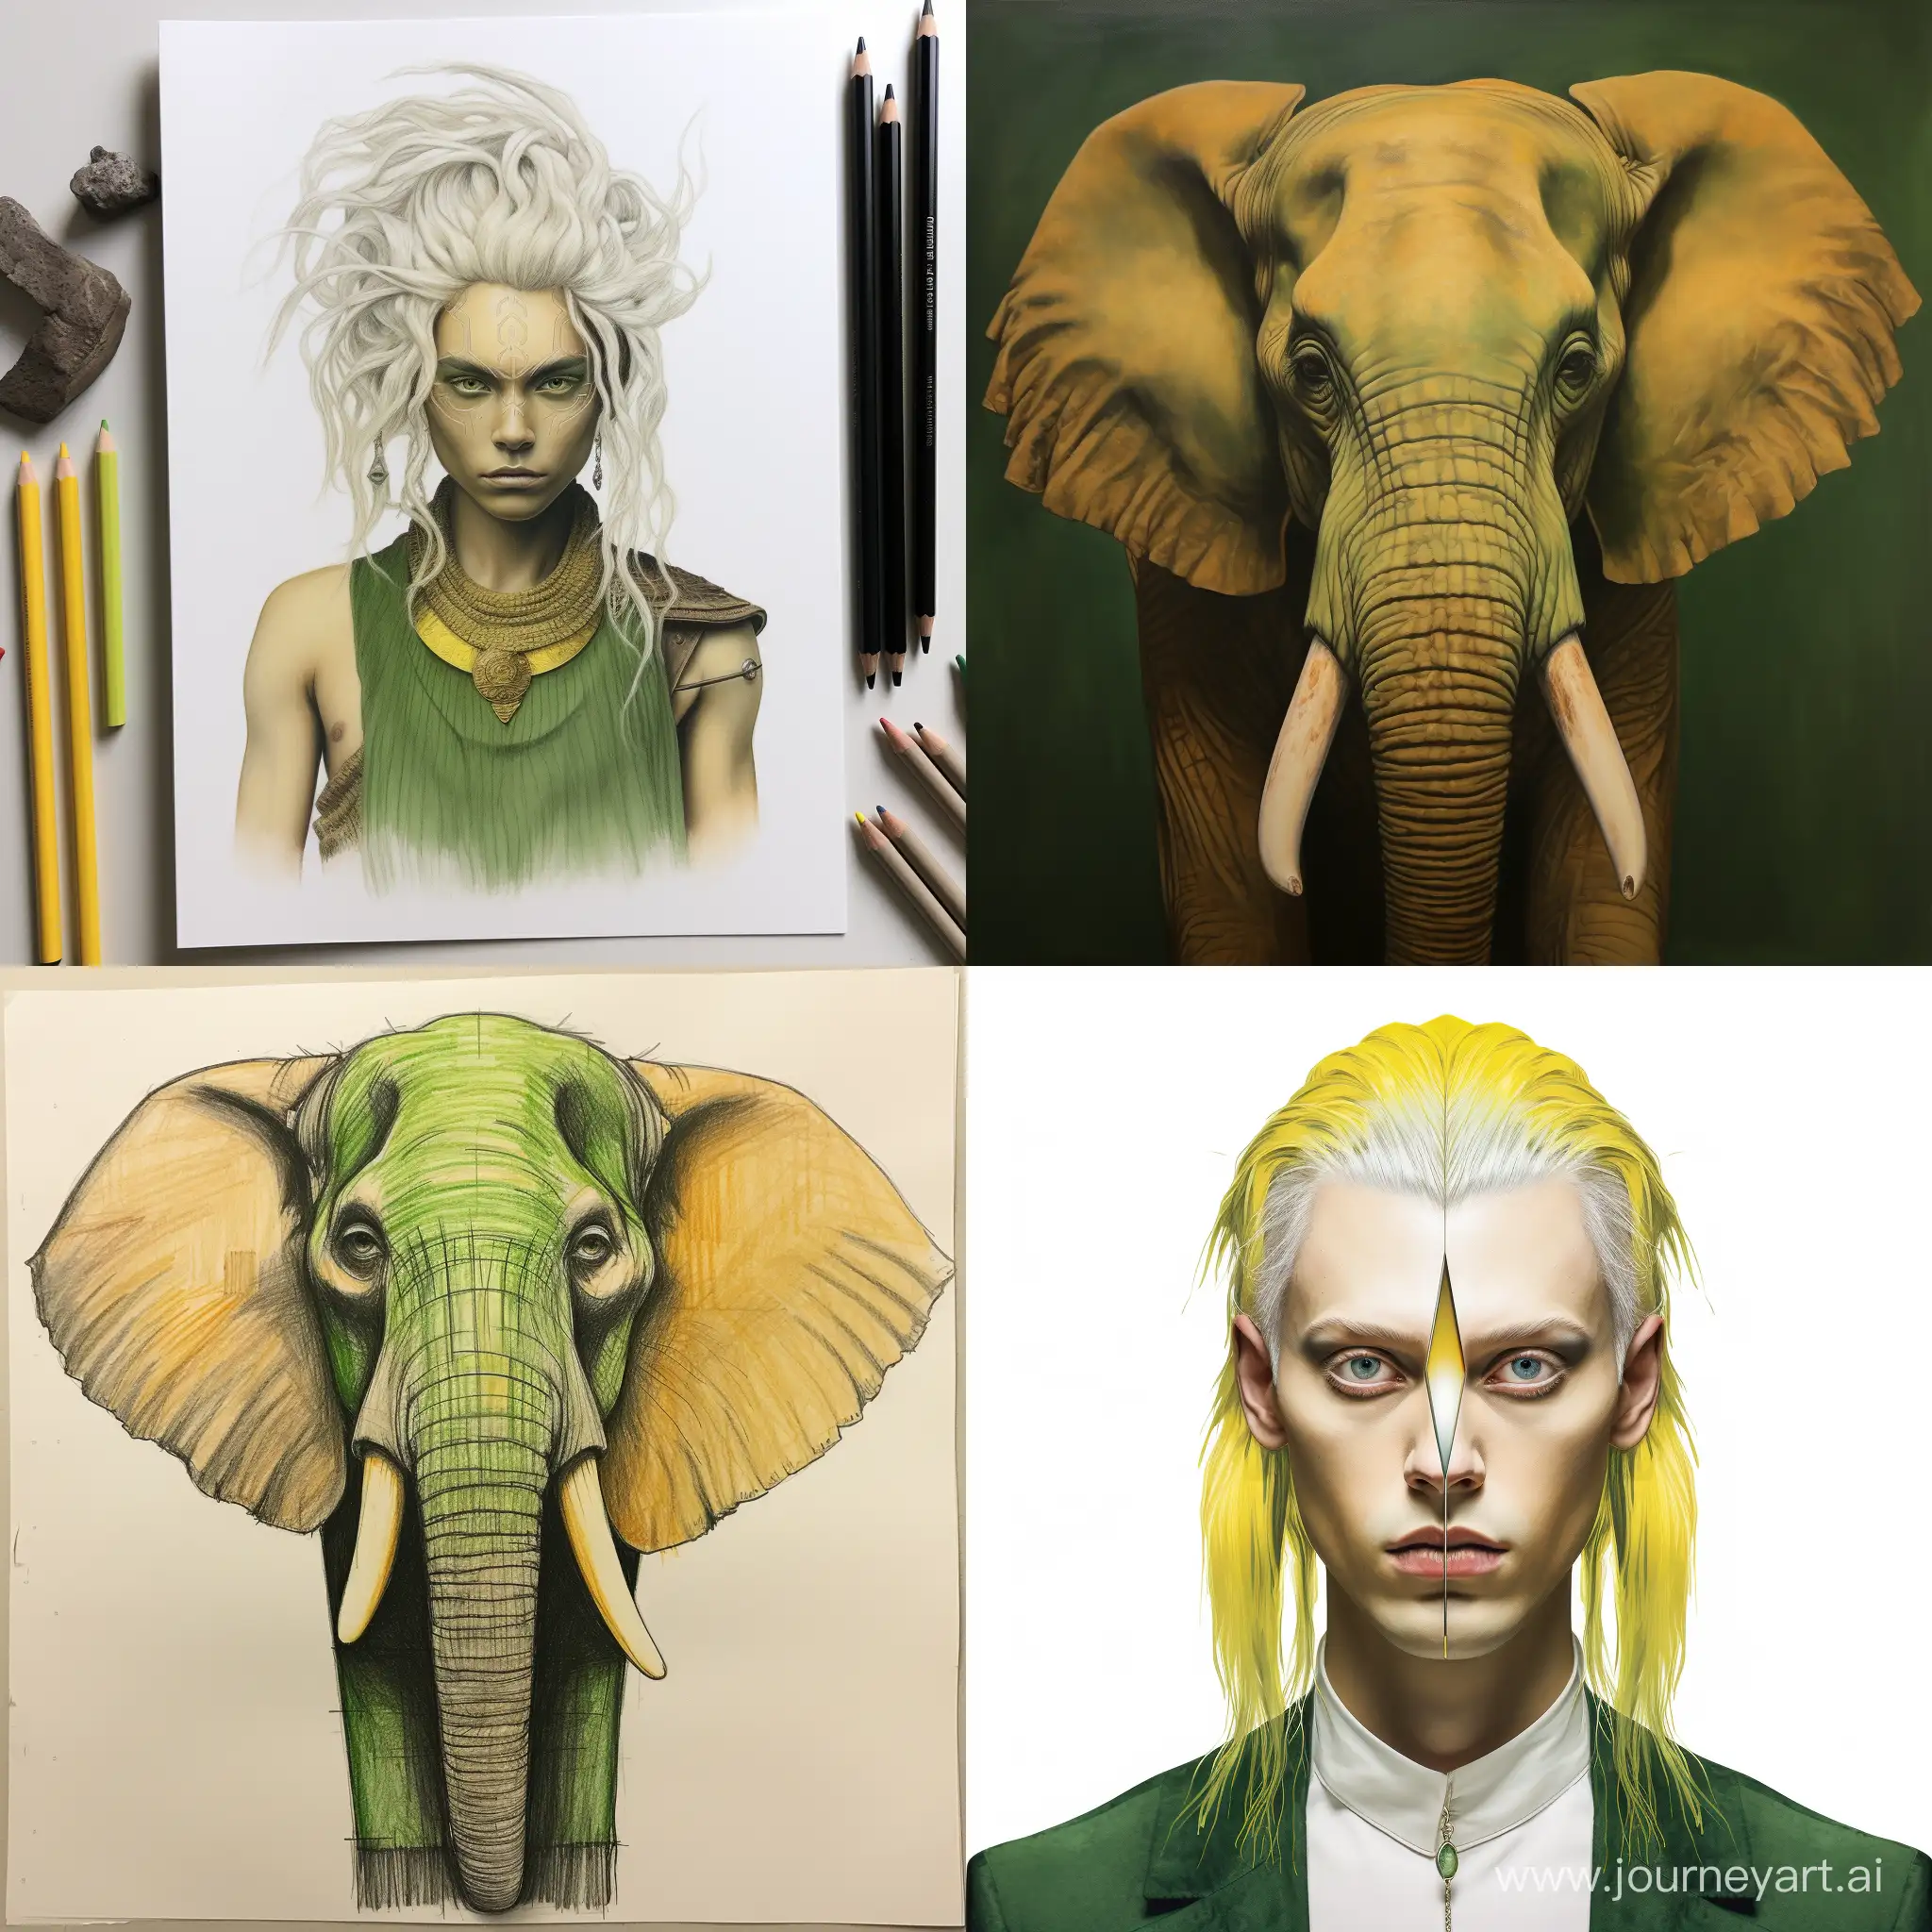 Unique-Male-Character-with-Green-Crimped-Hair-3-Legs-Yellow-Skin-4-Eyes-Tusks-and-SquareShaped-Head